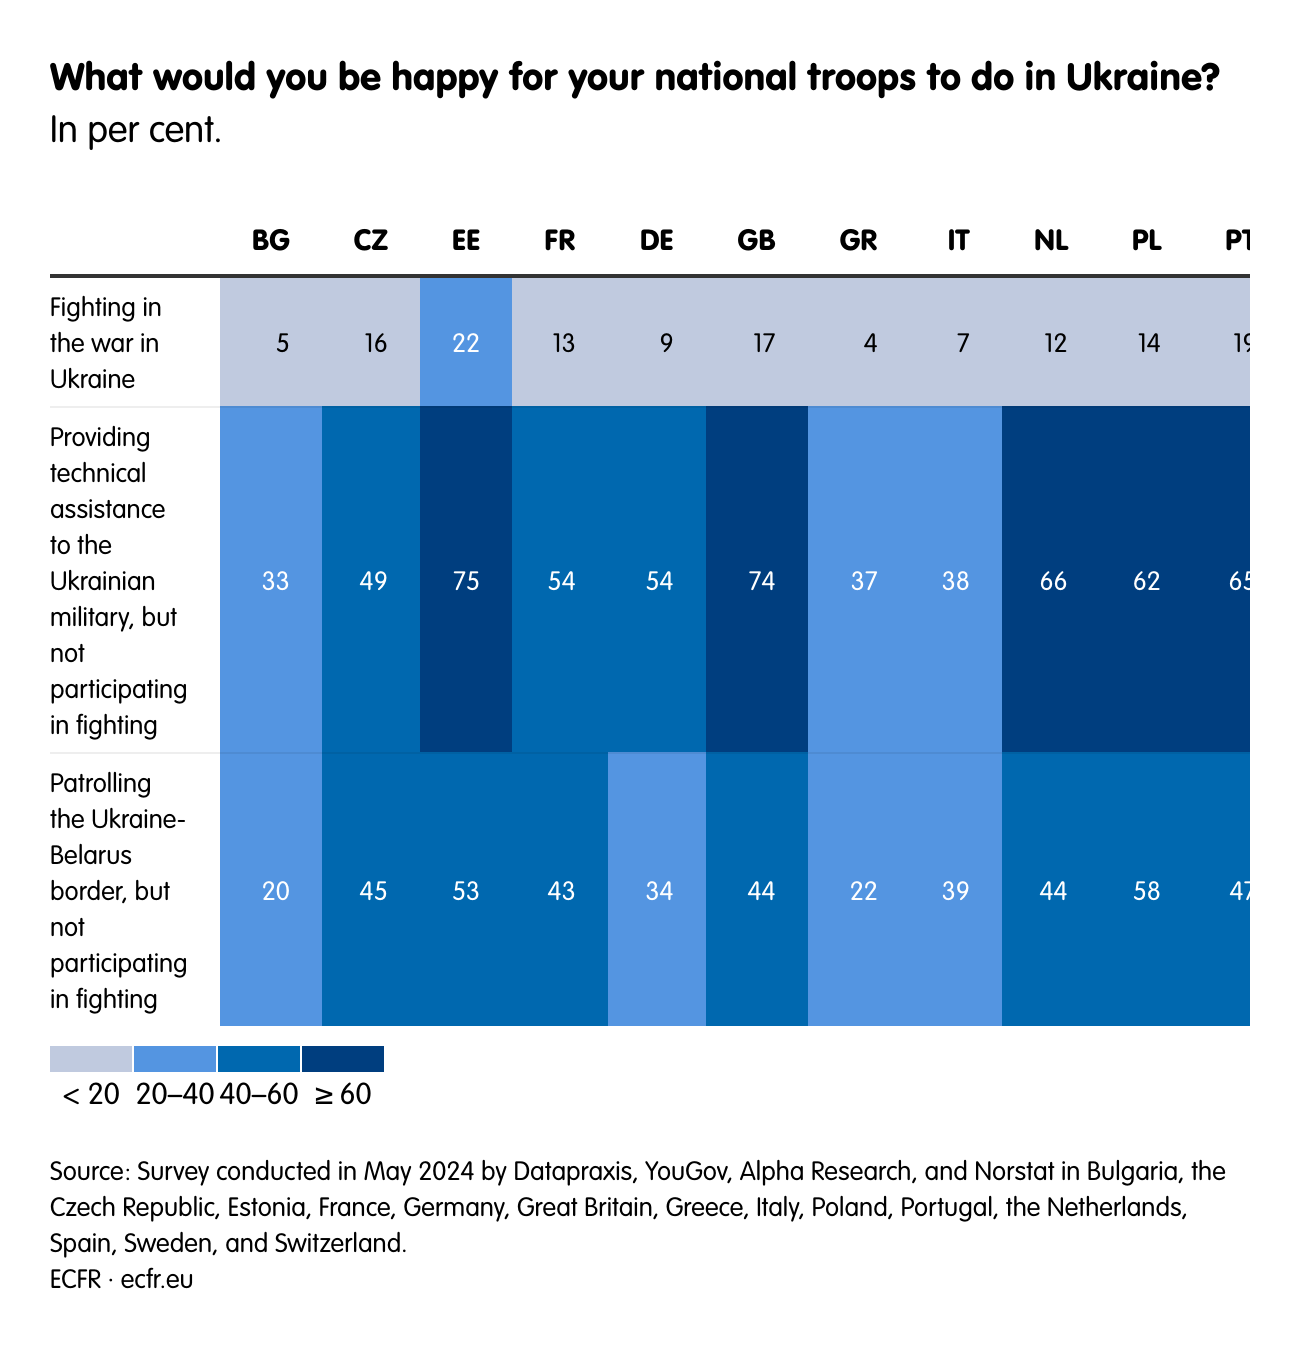 What would you be happy for your national troops to do in Ukraine?